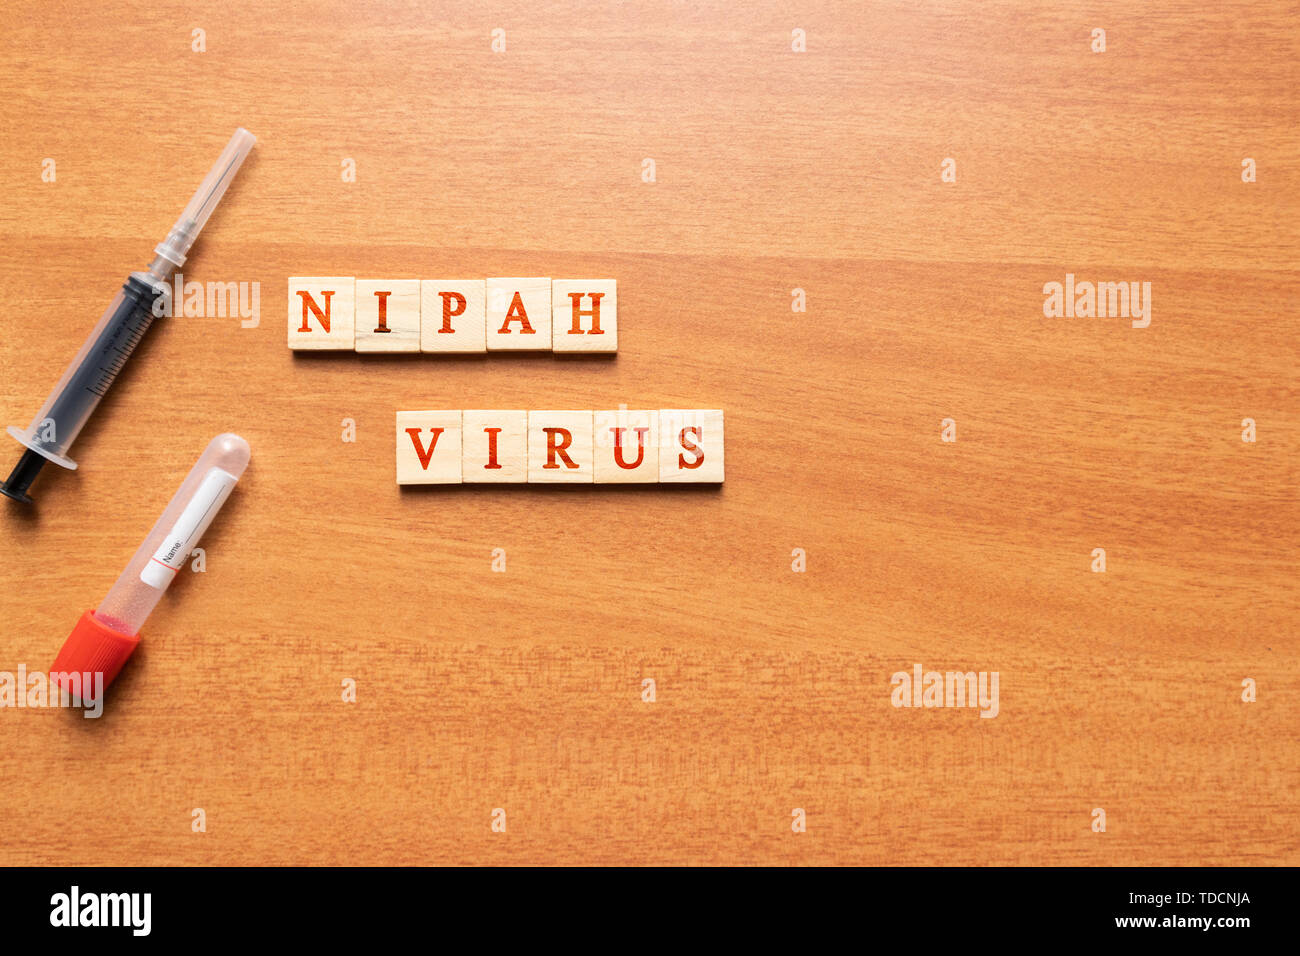 Nipah Virus on a wooden textured background with syringe and vacutainer blood collection tube. Stock Photo